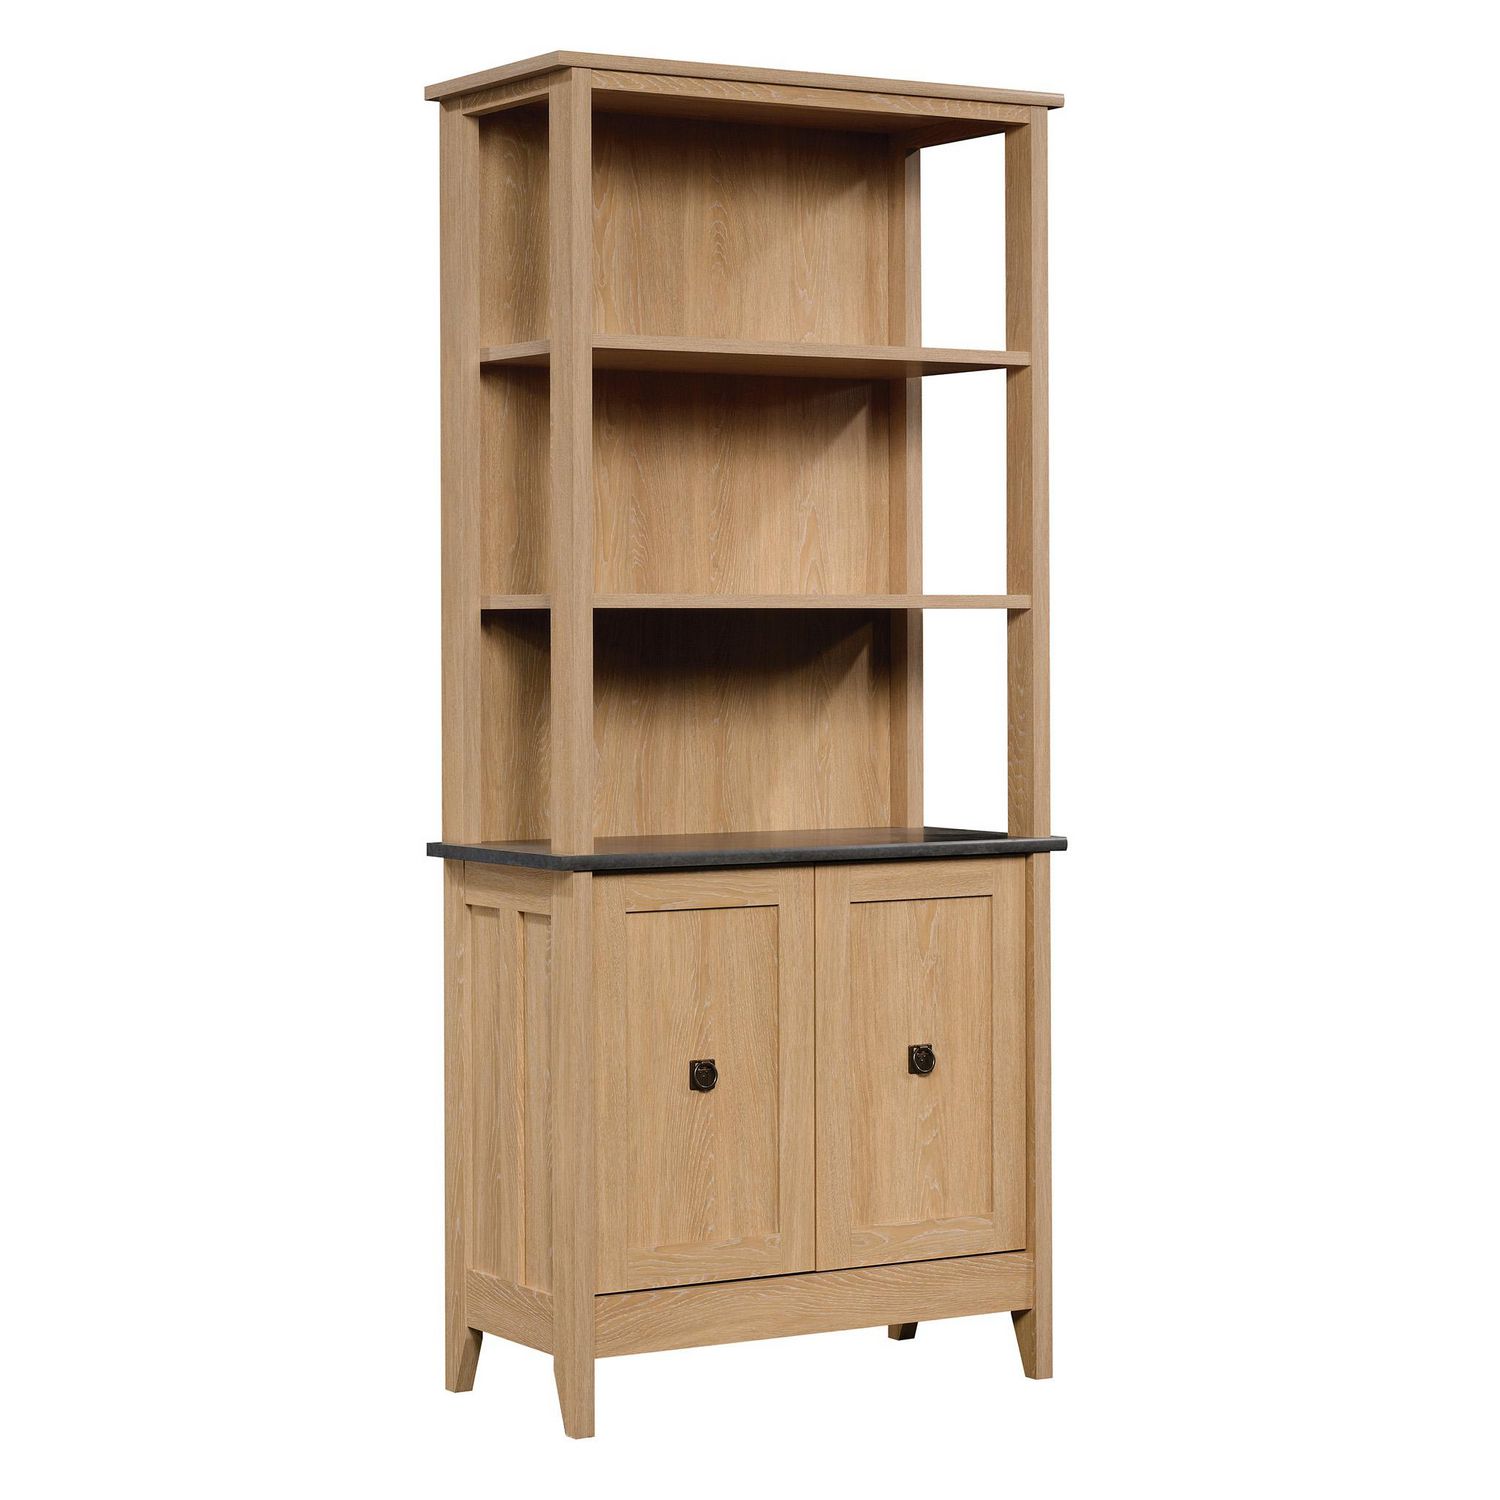 August Hill Bookcase W Doors Dover Oak, Sauder Bookcase With Doors Canada